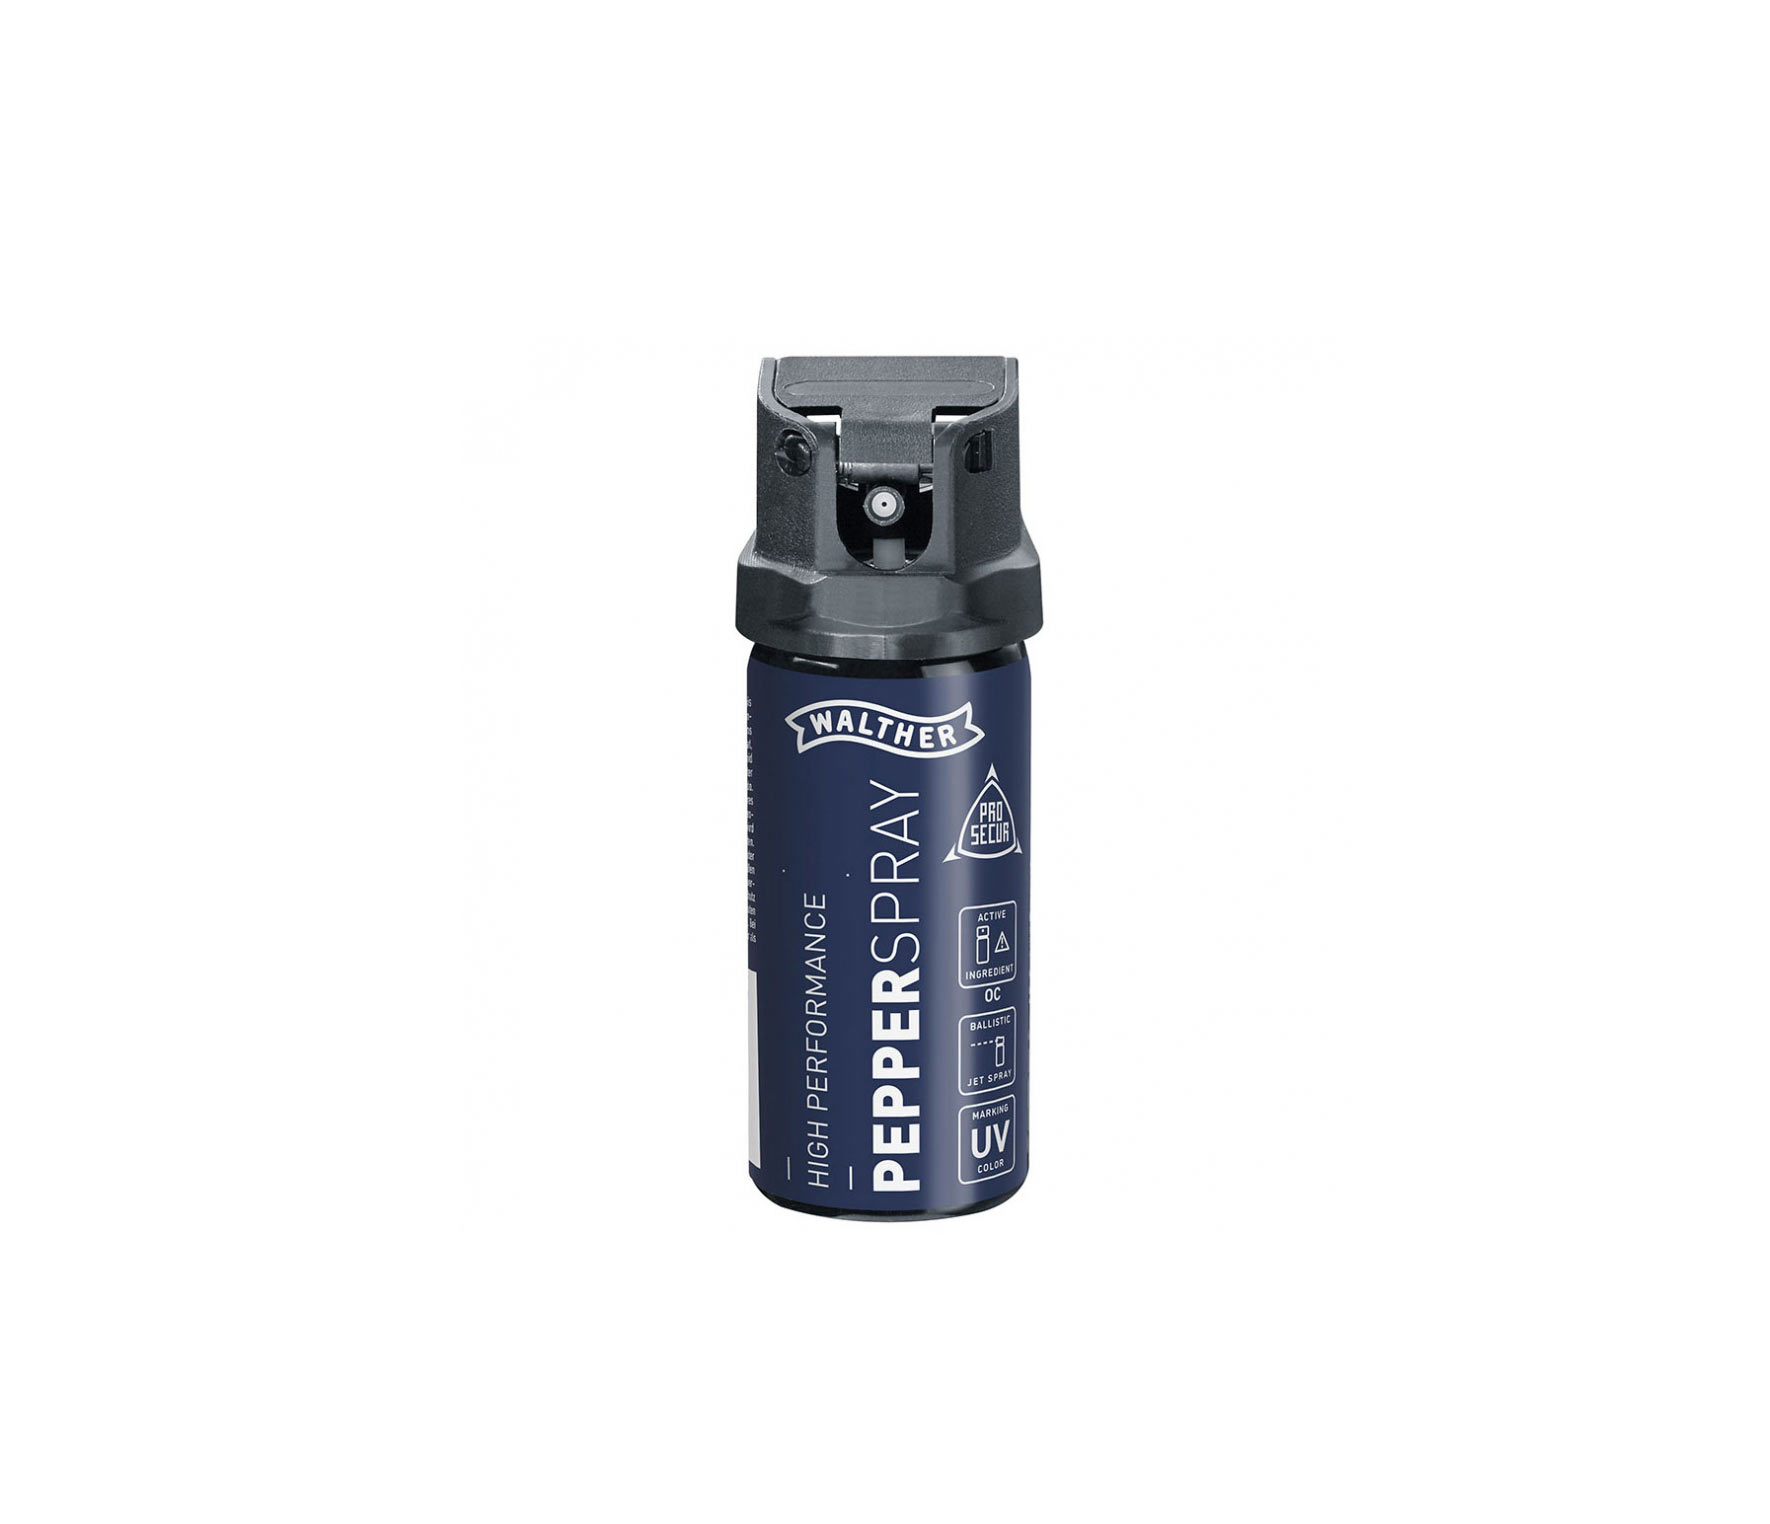 spray piper walther 53 ml